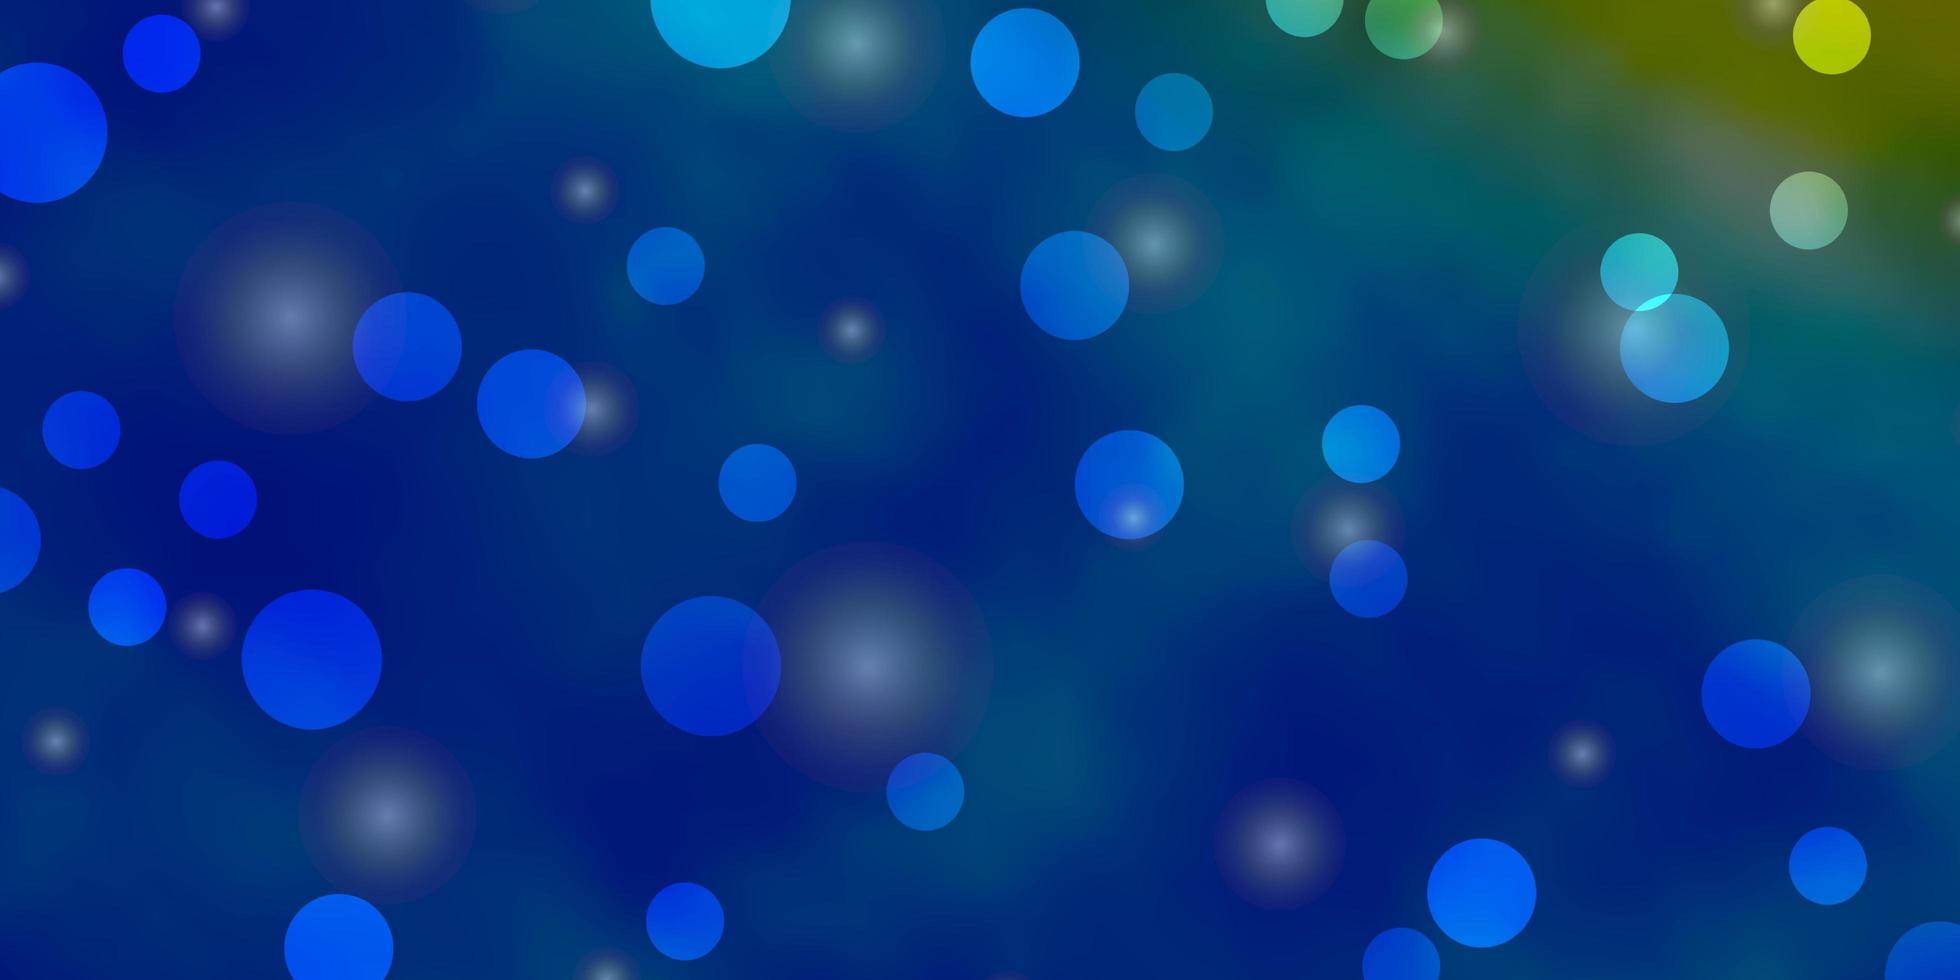 Light Blue, Yellow texture with circles, stars. vector